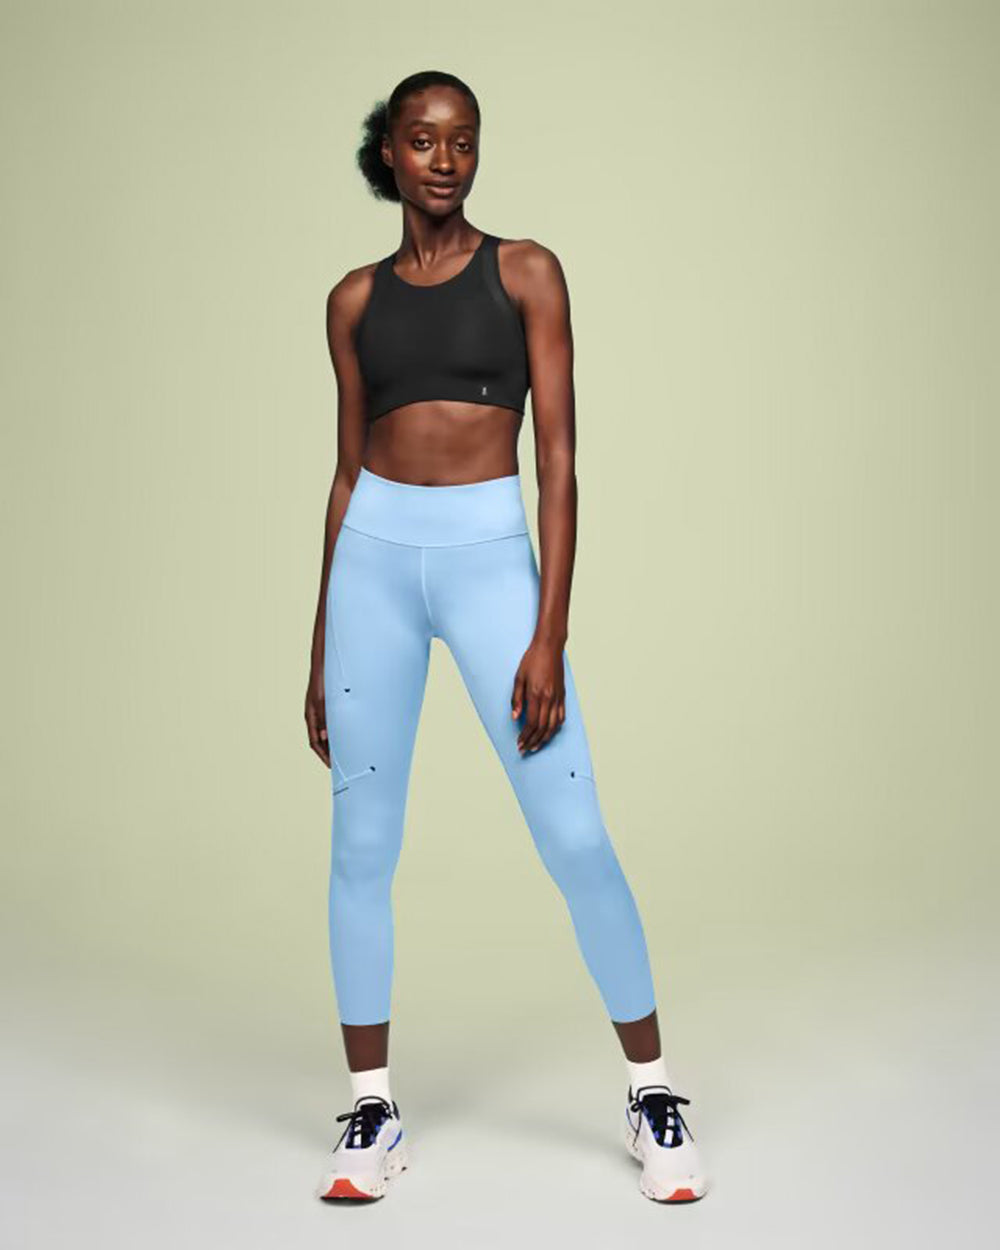 On Running Womens Performance Tights Blue